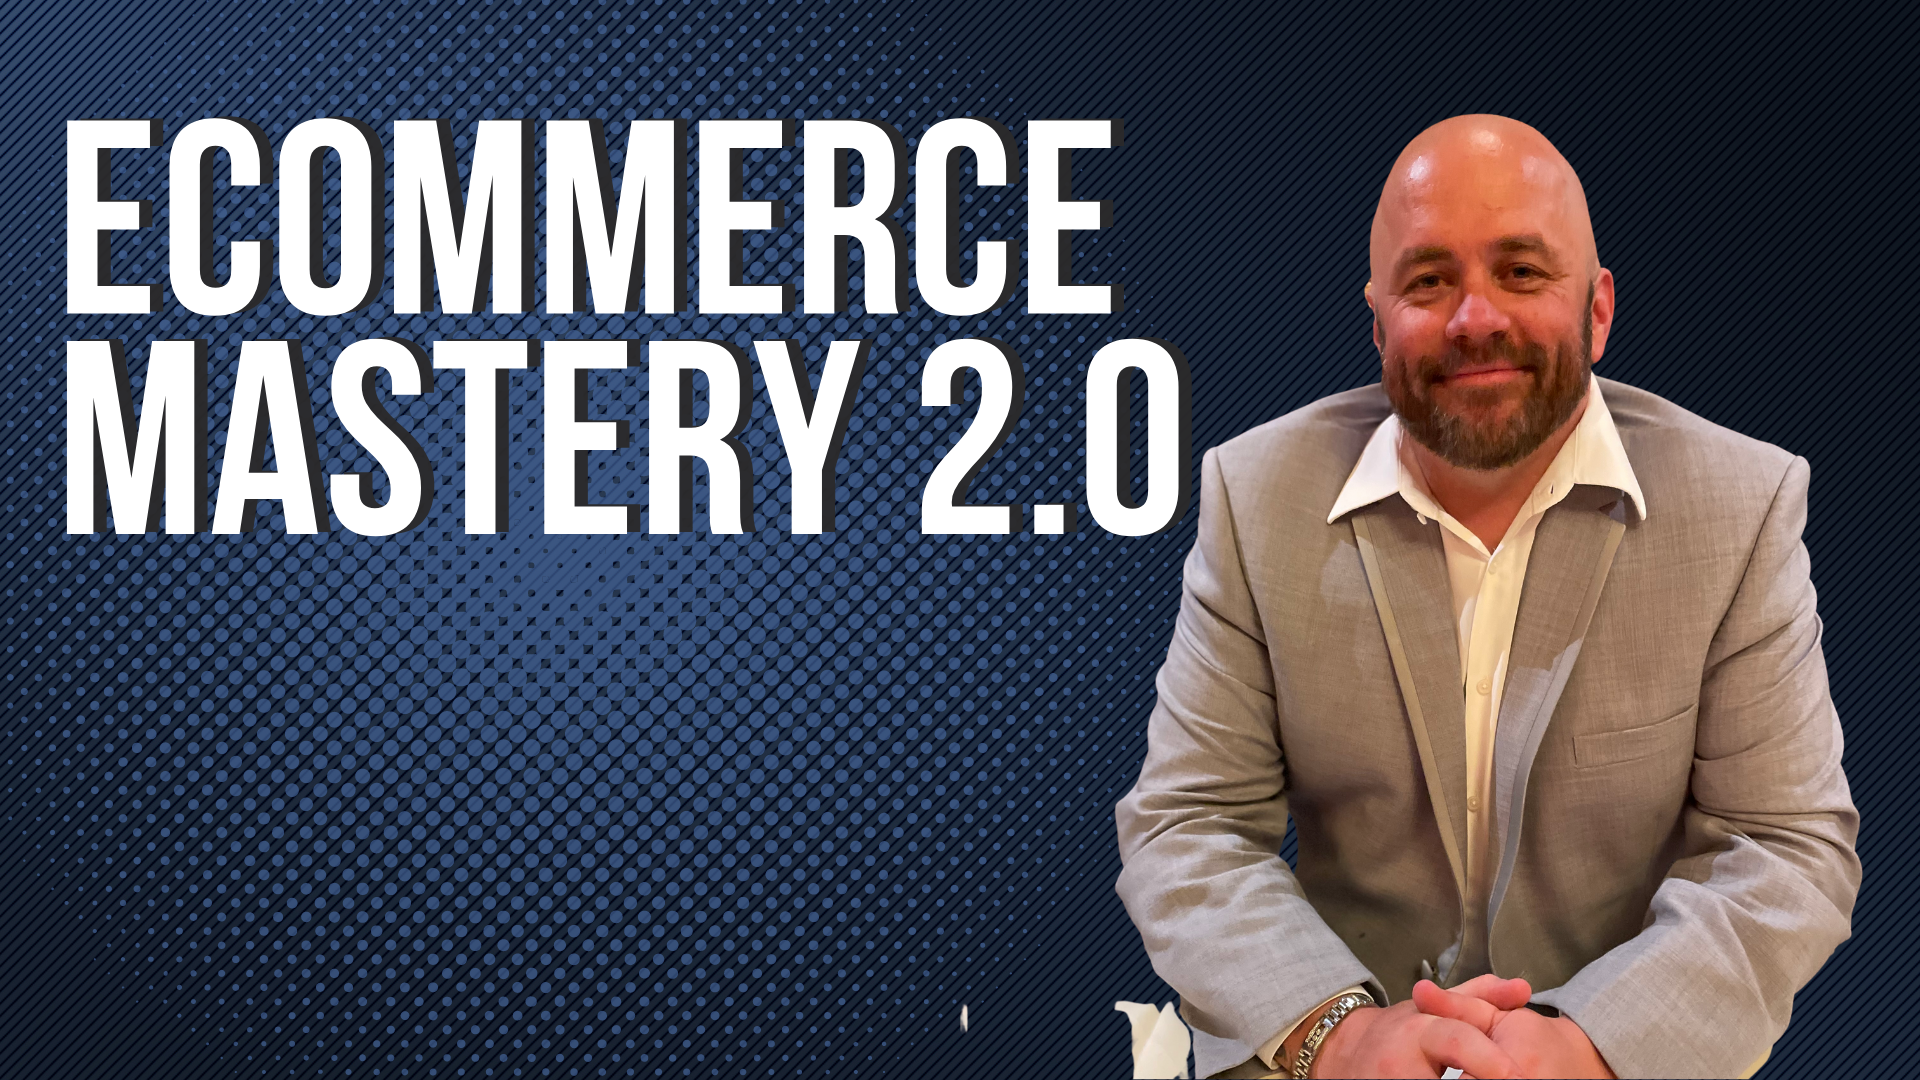 Ecommerce Mastery Course 2.0